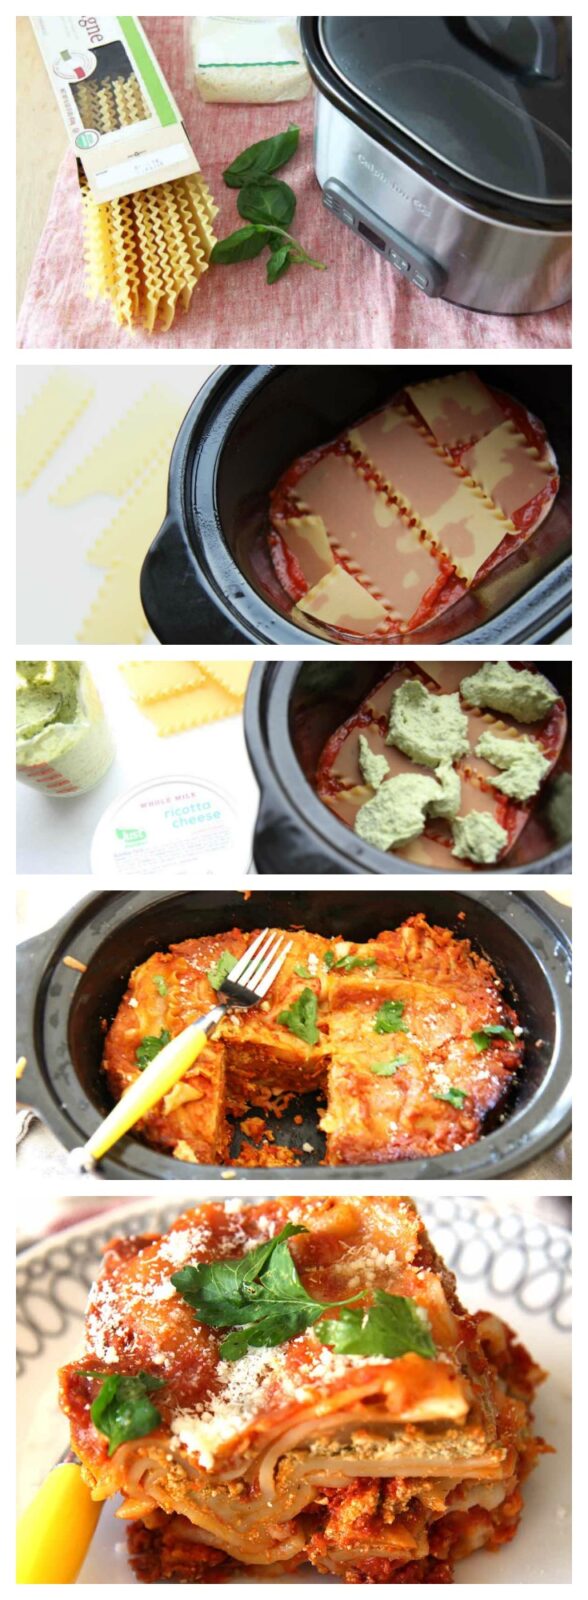 Slow Cooker Pesto Lasagna Recipe. Easy hot meal waiting for you when you get home.. The short cut is no need to boil the noodles and one pot. ChopHappy.com